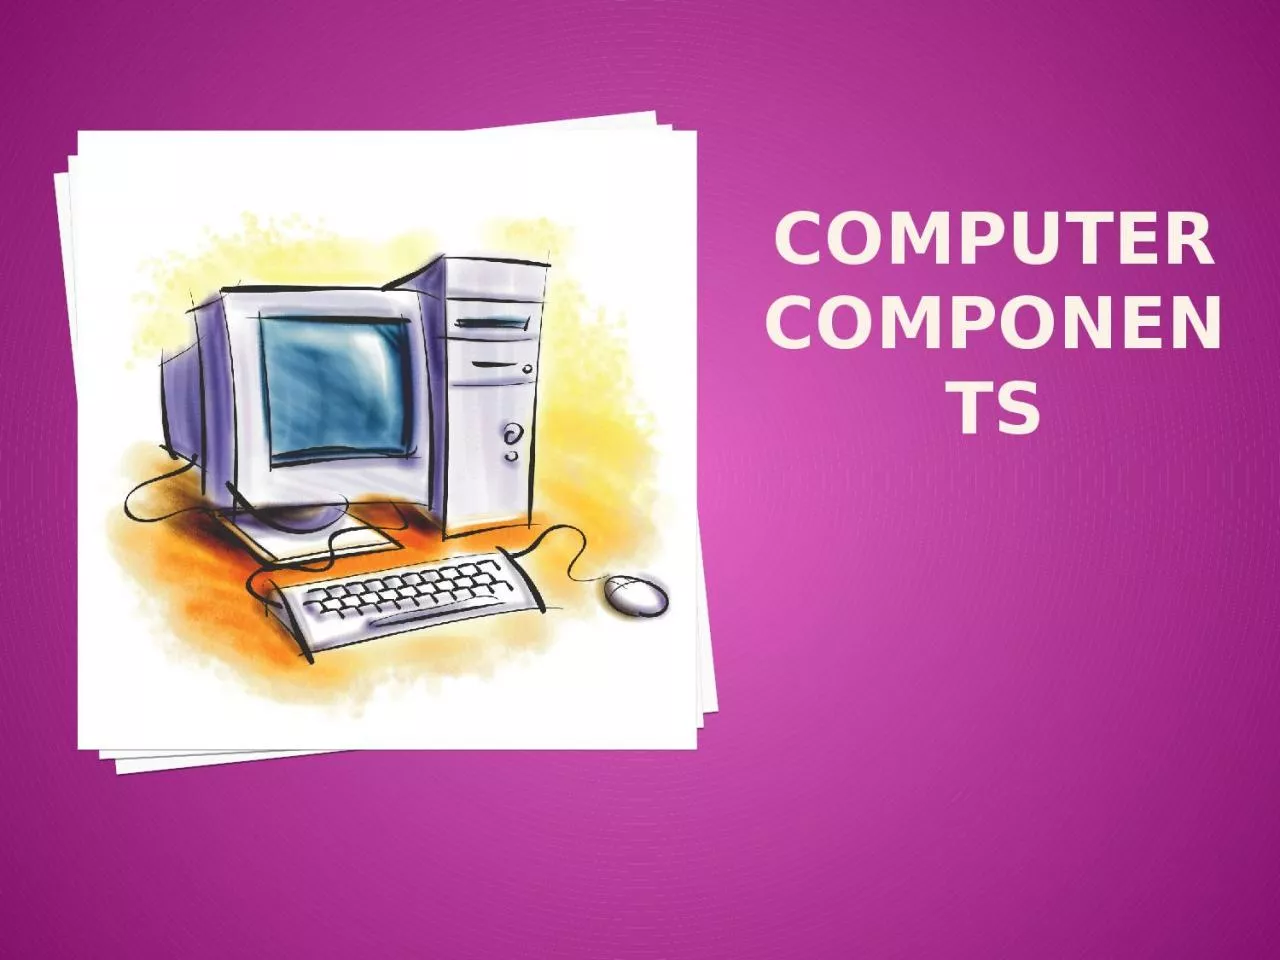 Computer components computer is an electronic device, that can accept data (input), manipulate